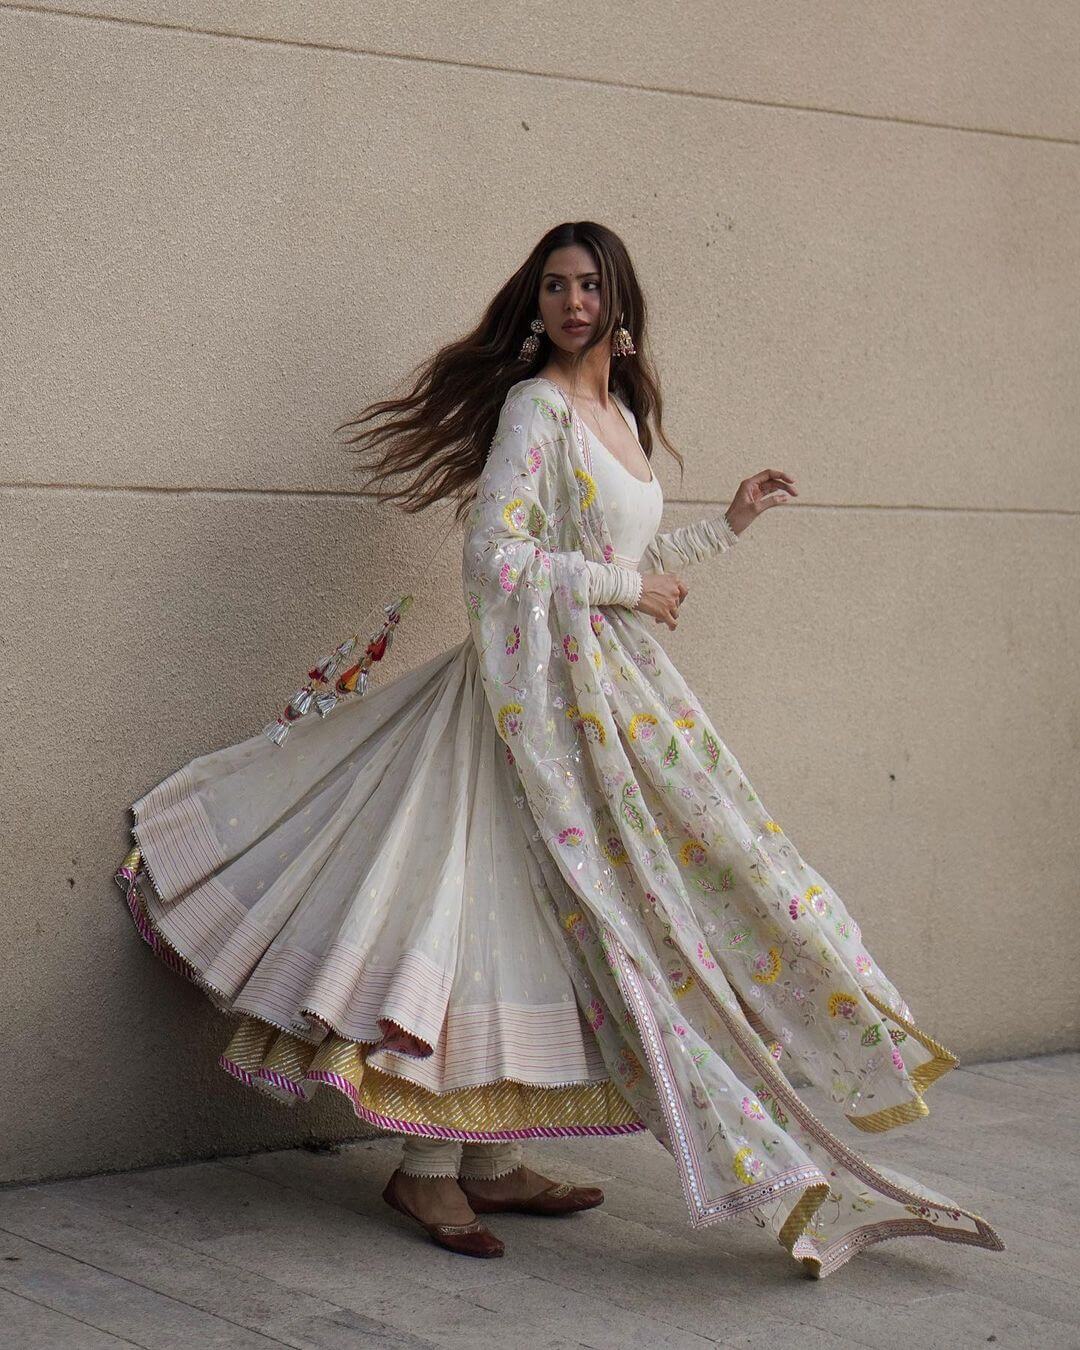 Sonam Bajwa In White Full Flare Anakarli Suit Outfit